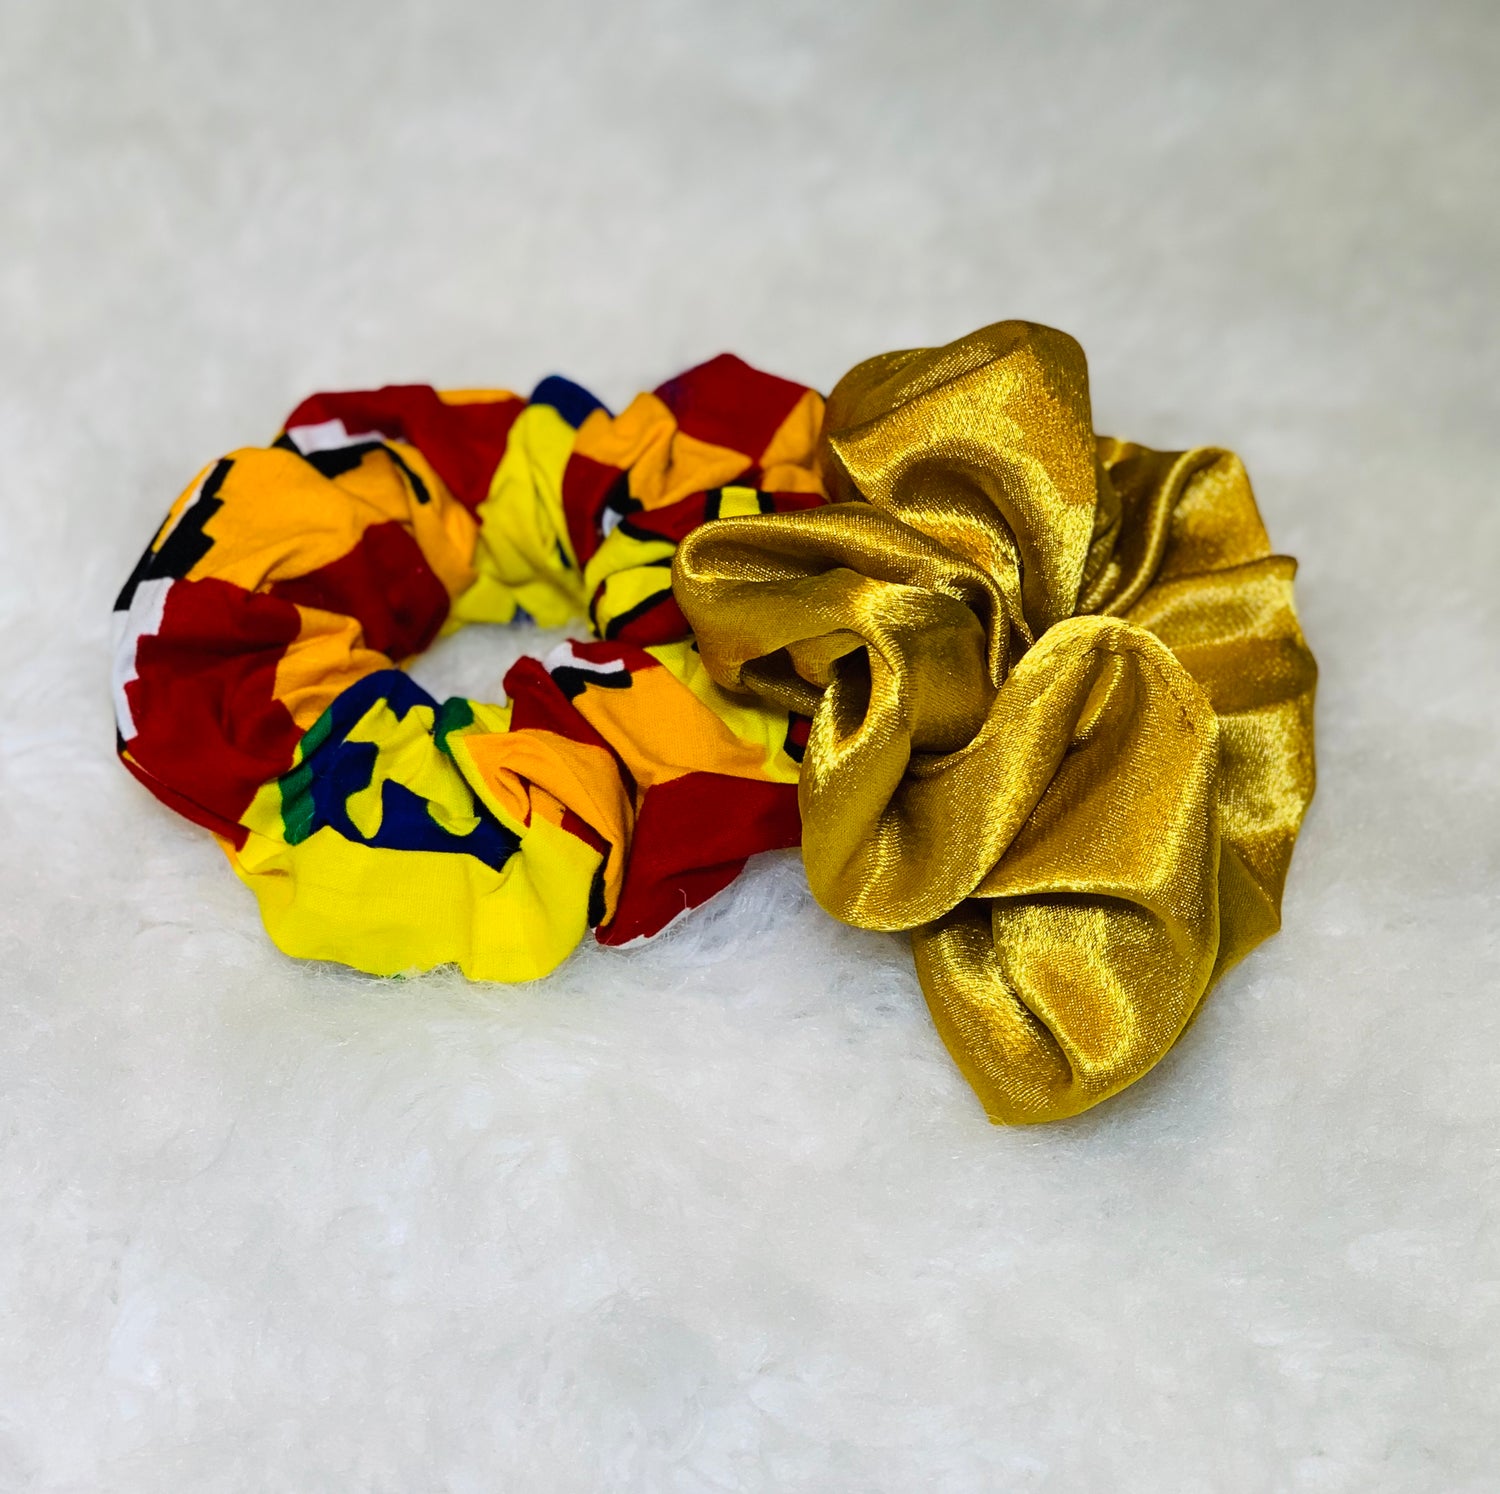 2 Different Color Scrunchie;  Red, Yellow , Blue And White Scrunchie And Gold Scrunchie